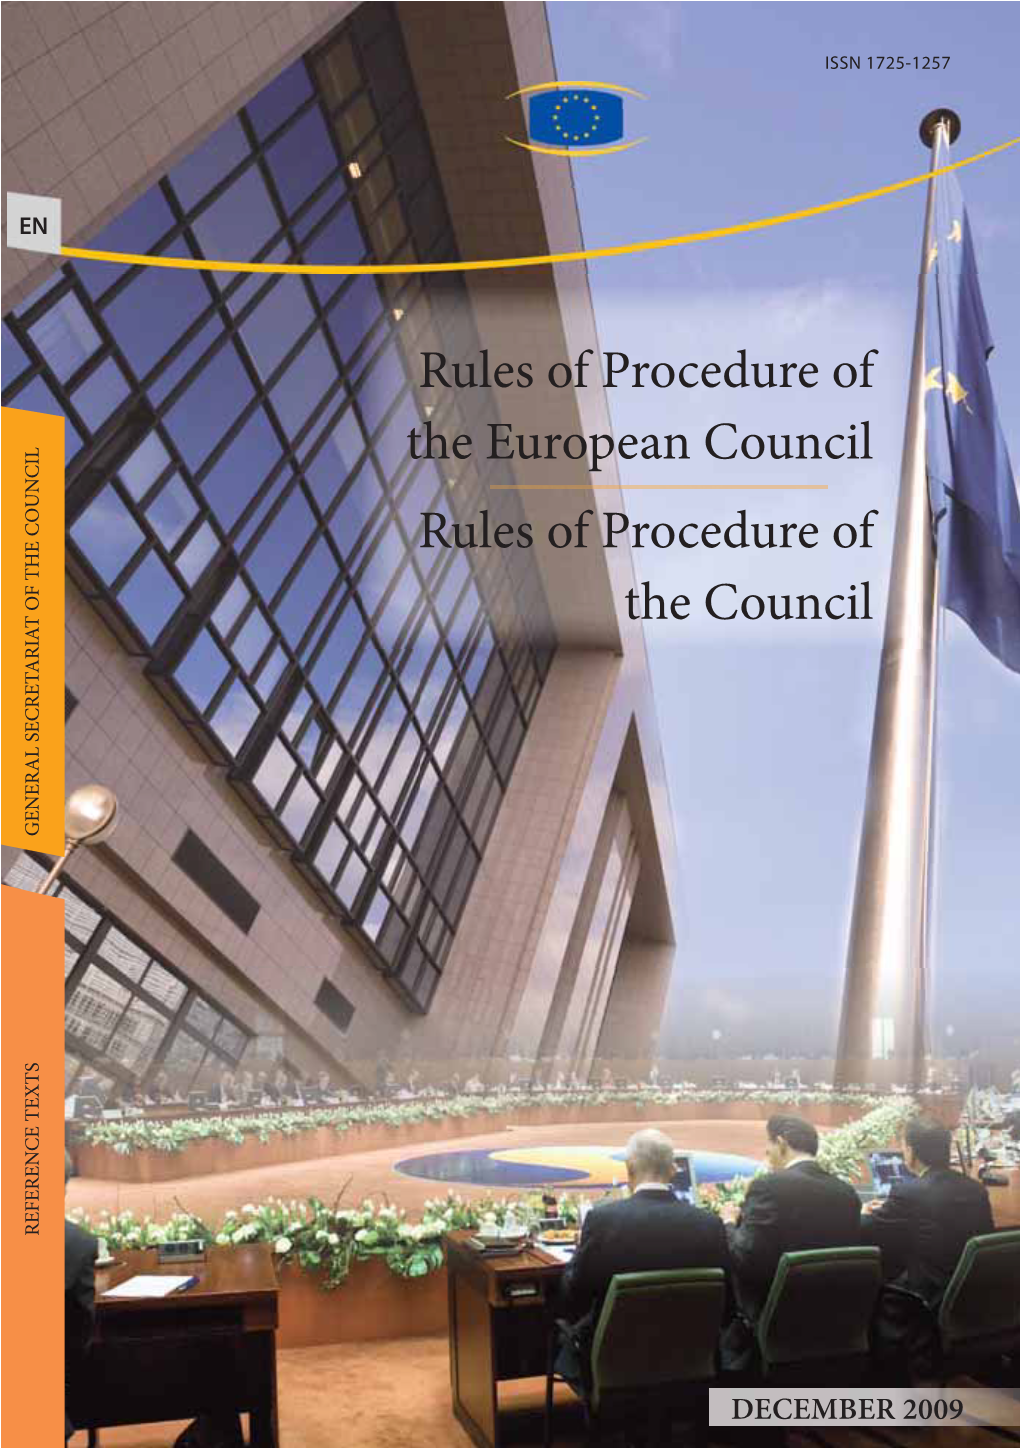 Rules of Procedure of the European Council